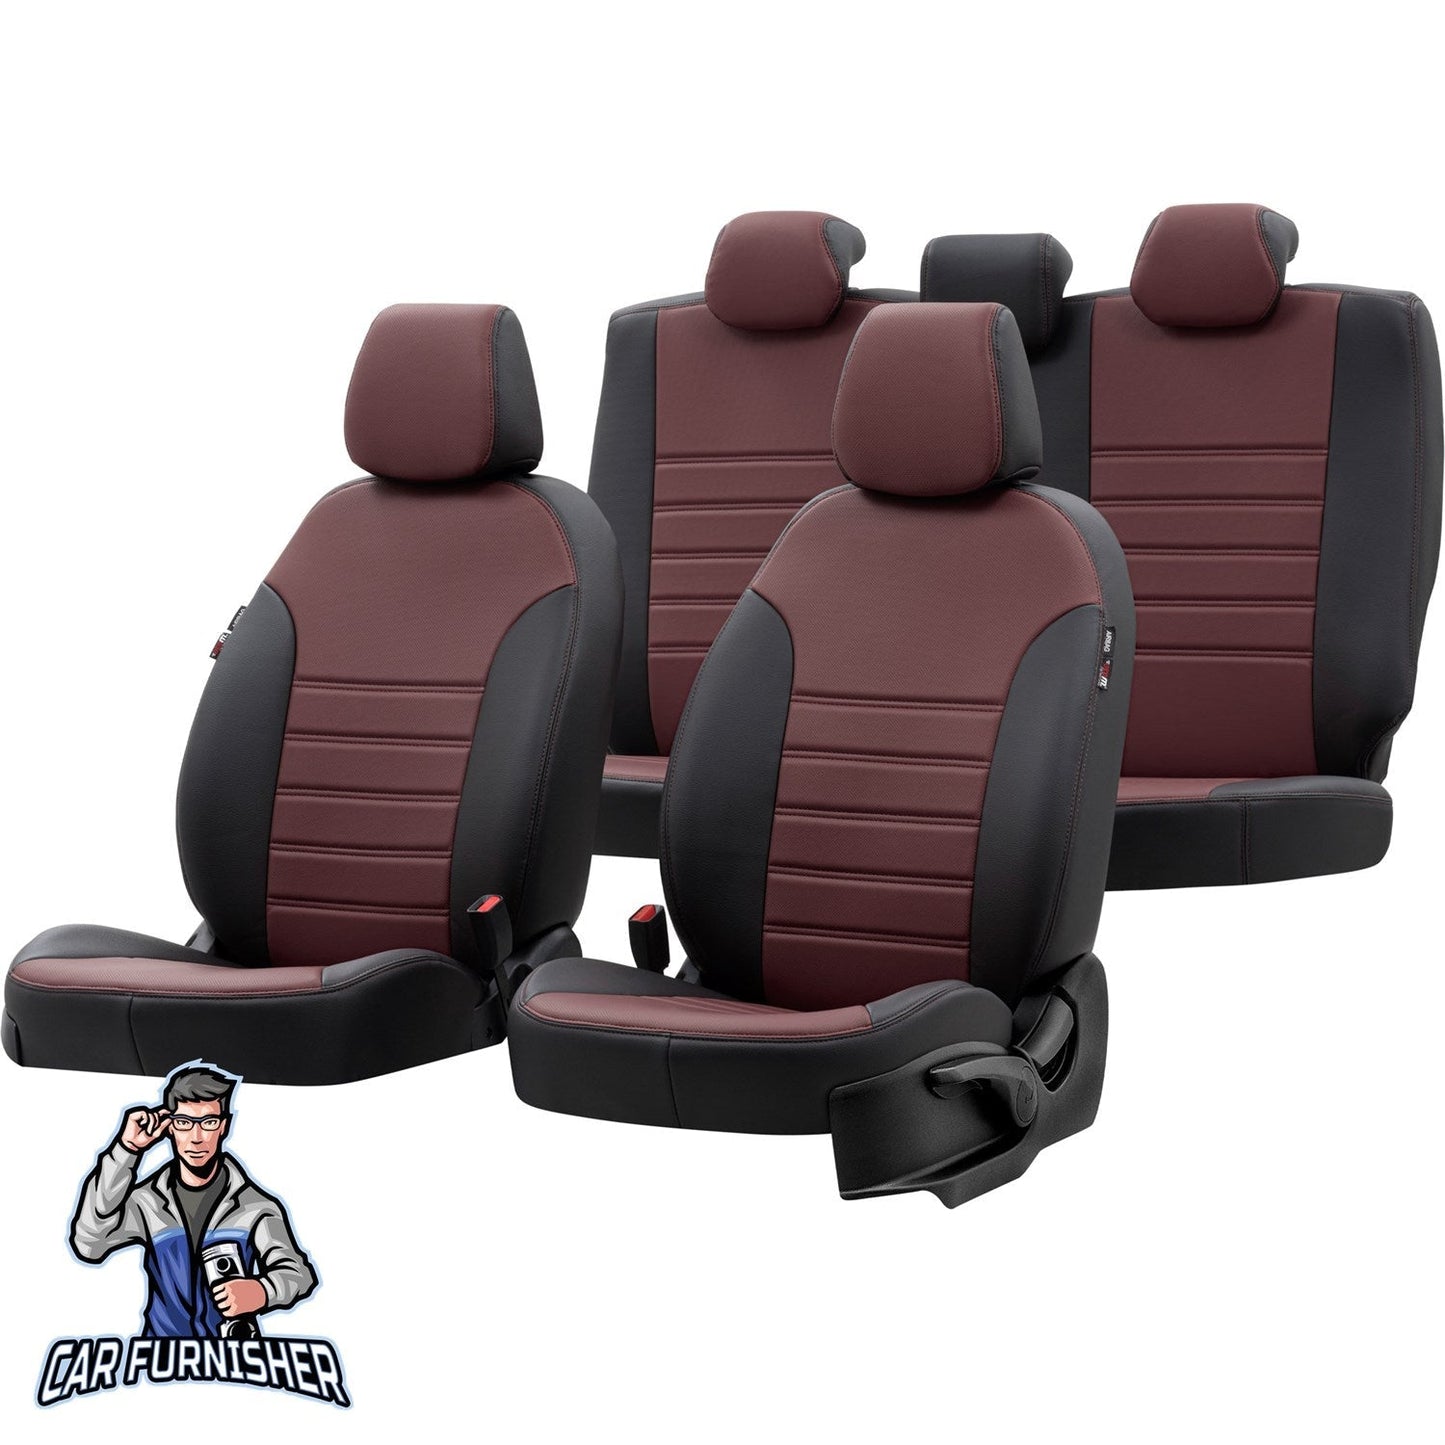 Proton Gen-2 Seat Covers Istanbul Leather Design Burgundy Leather